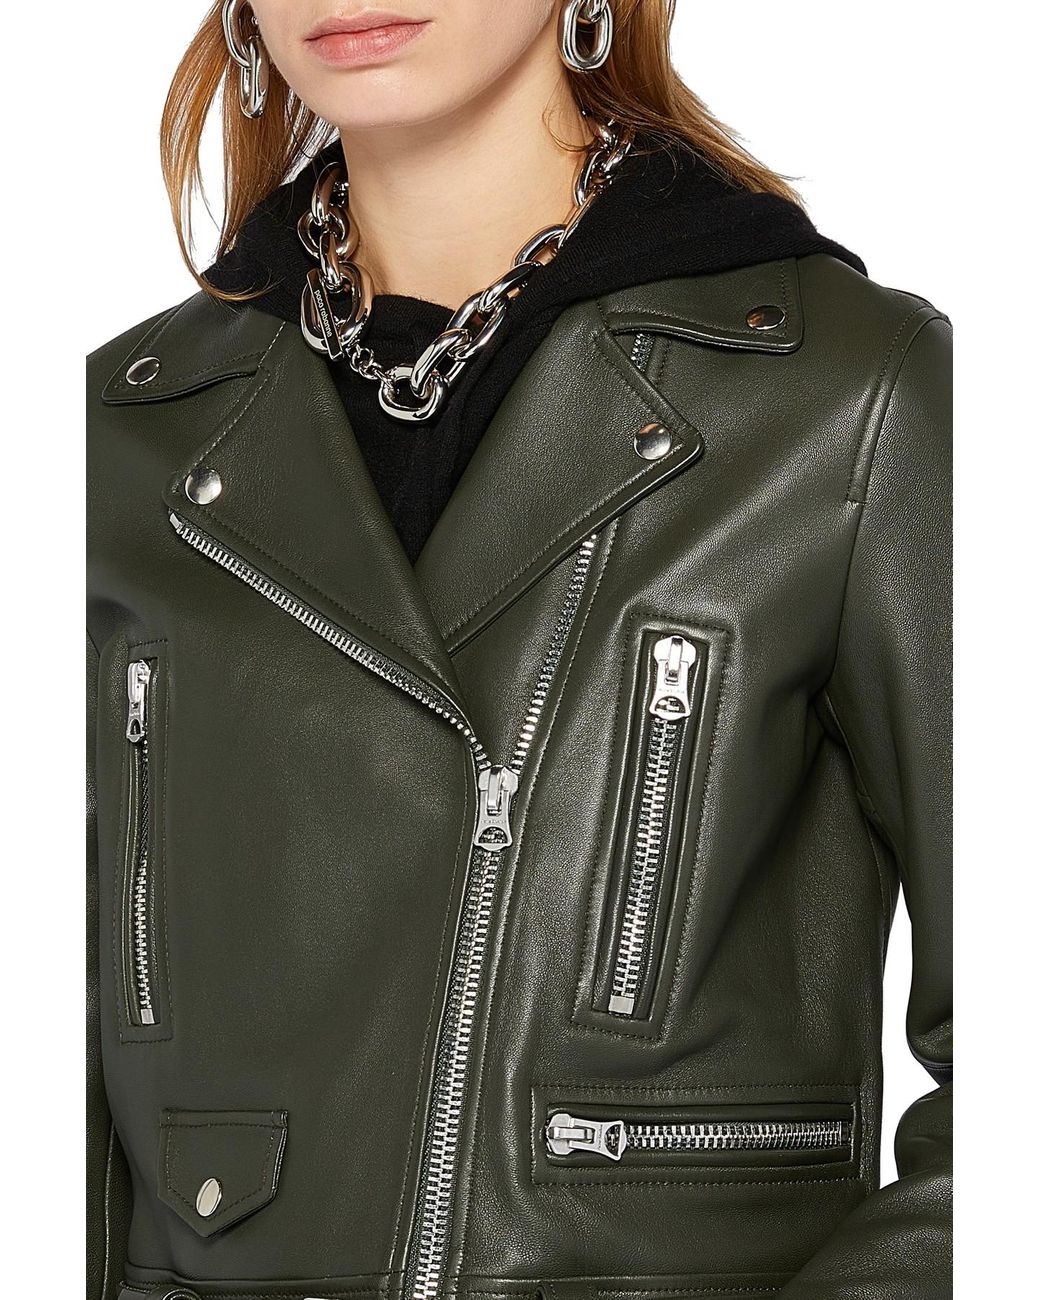 Acne Studios Velocite Leather Shearling Jacket in Black Womens Jackets Acne Studios Jackets Save 69% 